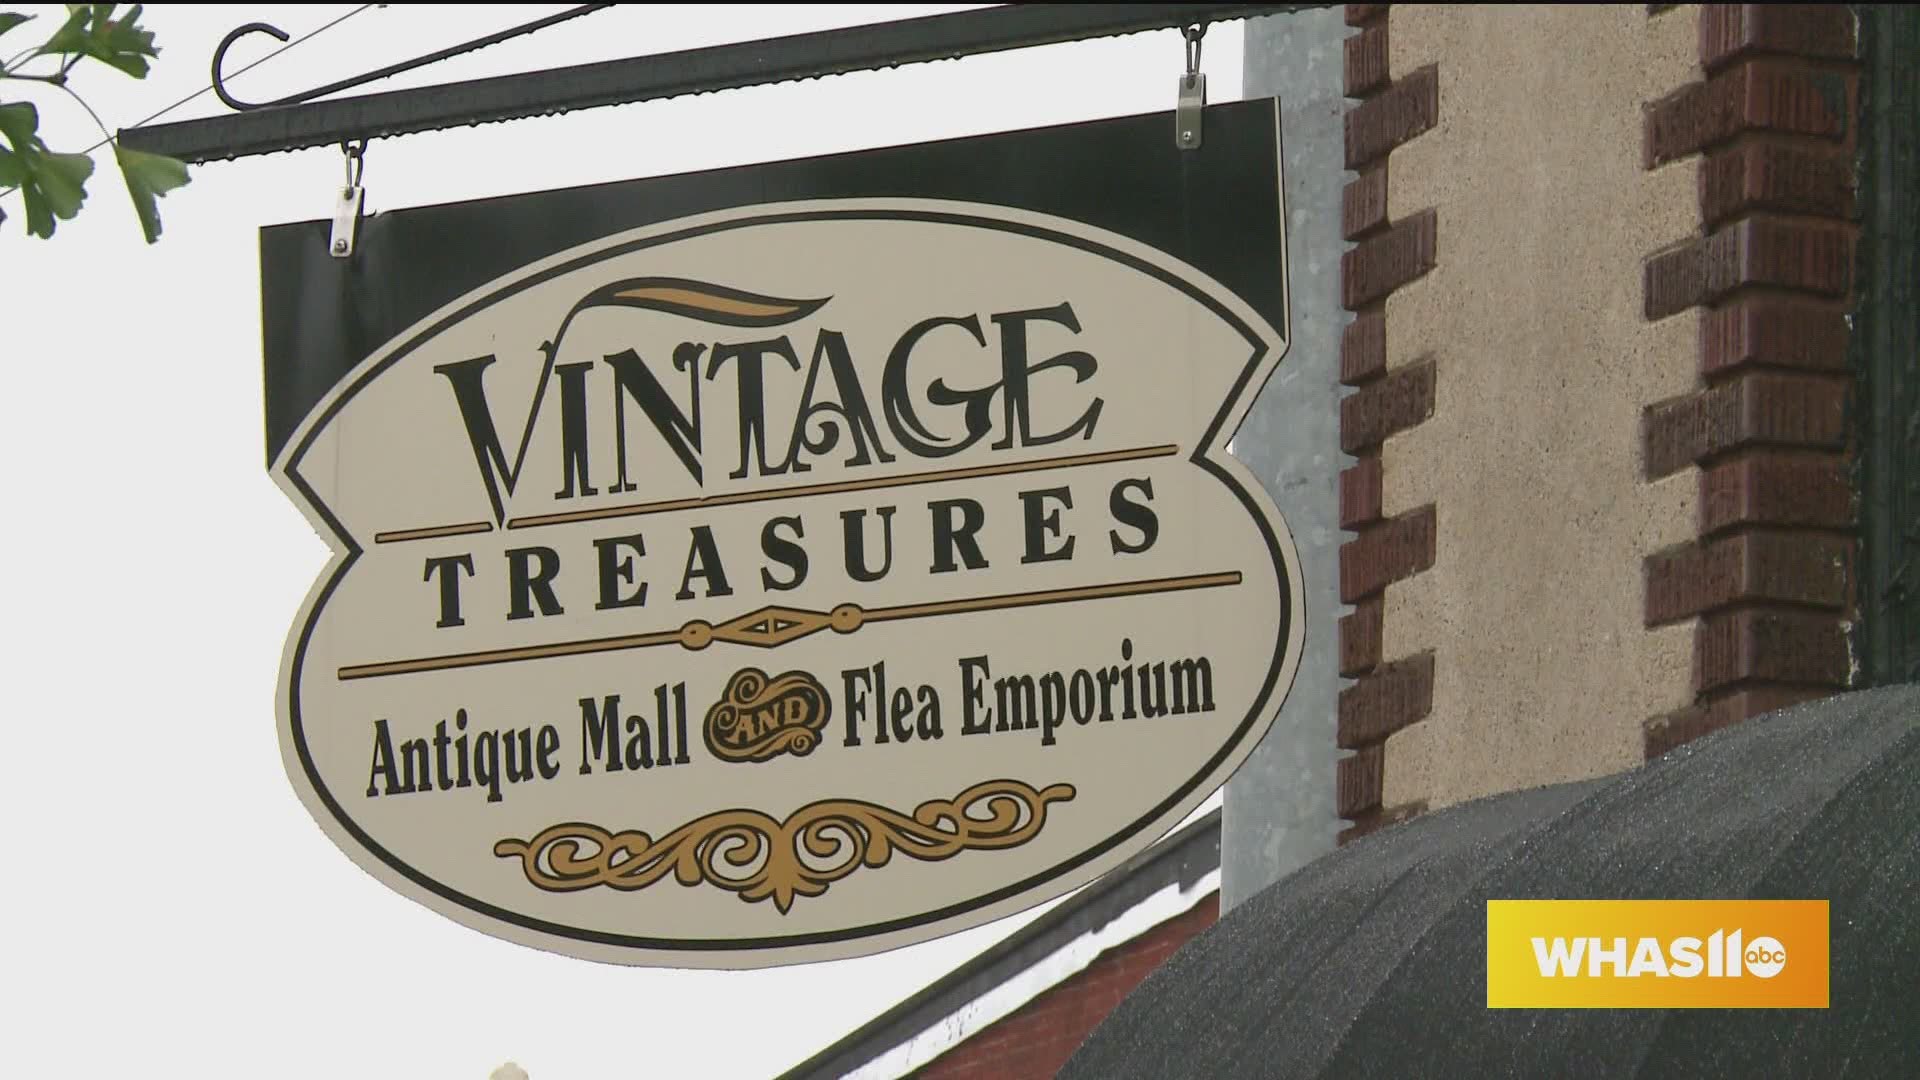 Vintage Treasures Antique Mall is located at 101 N. Mulberry Street in Corydon, IN. For more information, call 812-736-3040.